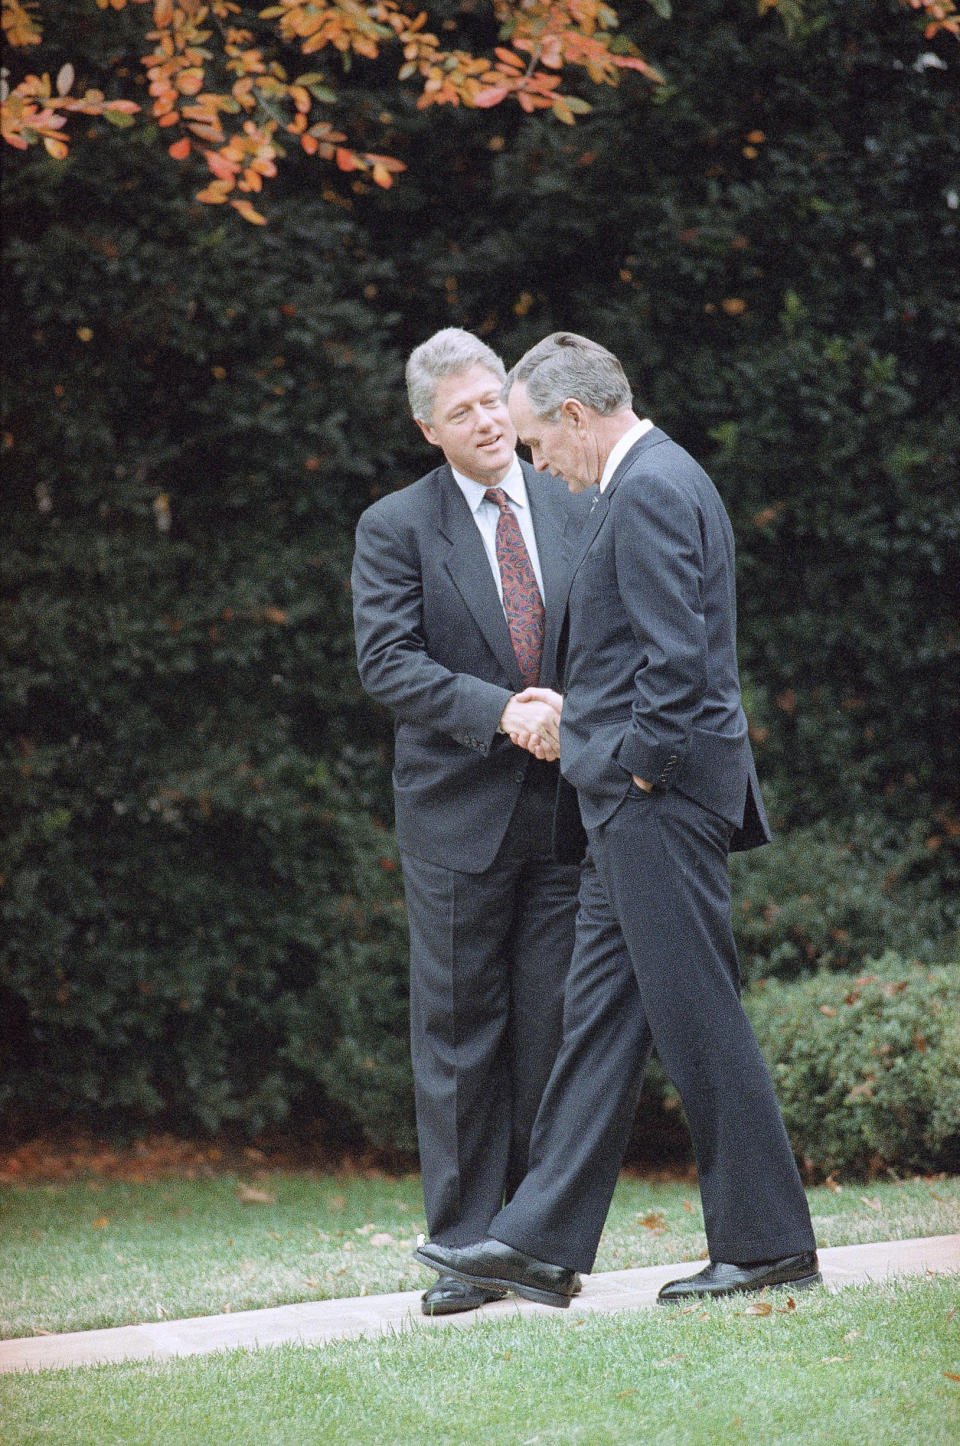 <p> FILE - In this Nov. 18, 1992 file photo, President George H.W. Bush shakes hands with President-elect Bill Clinton after an Oval Office meeting in Washington. (AP Photo/Greg Gibson) </p>